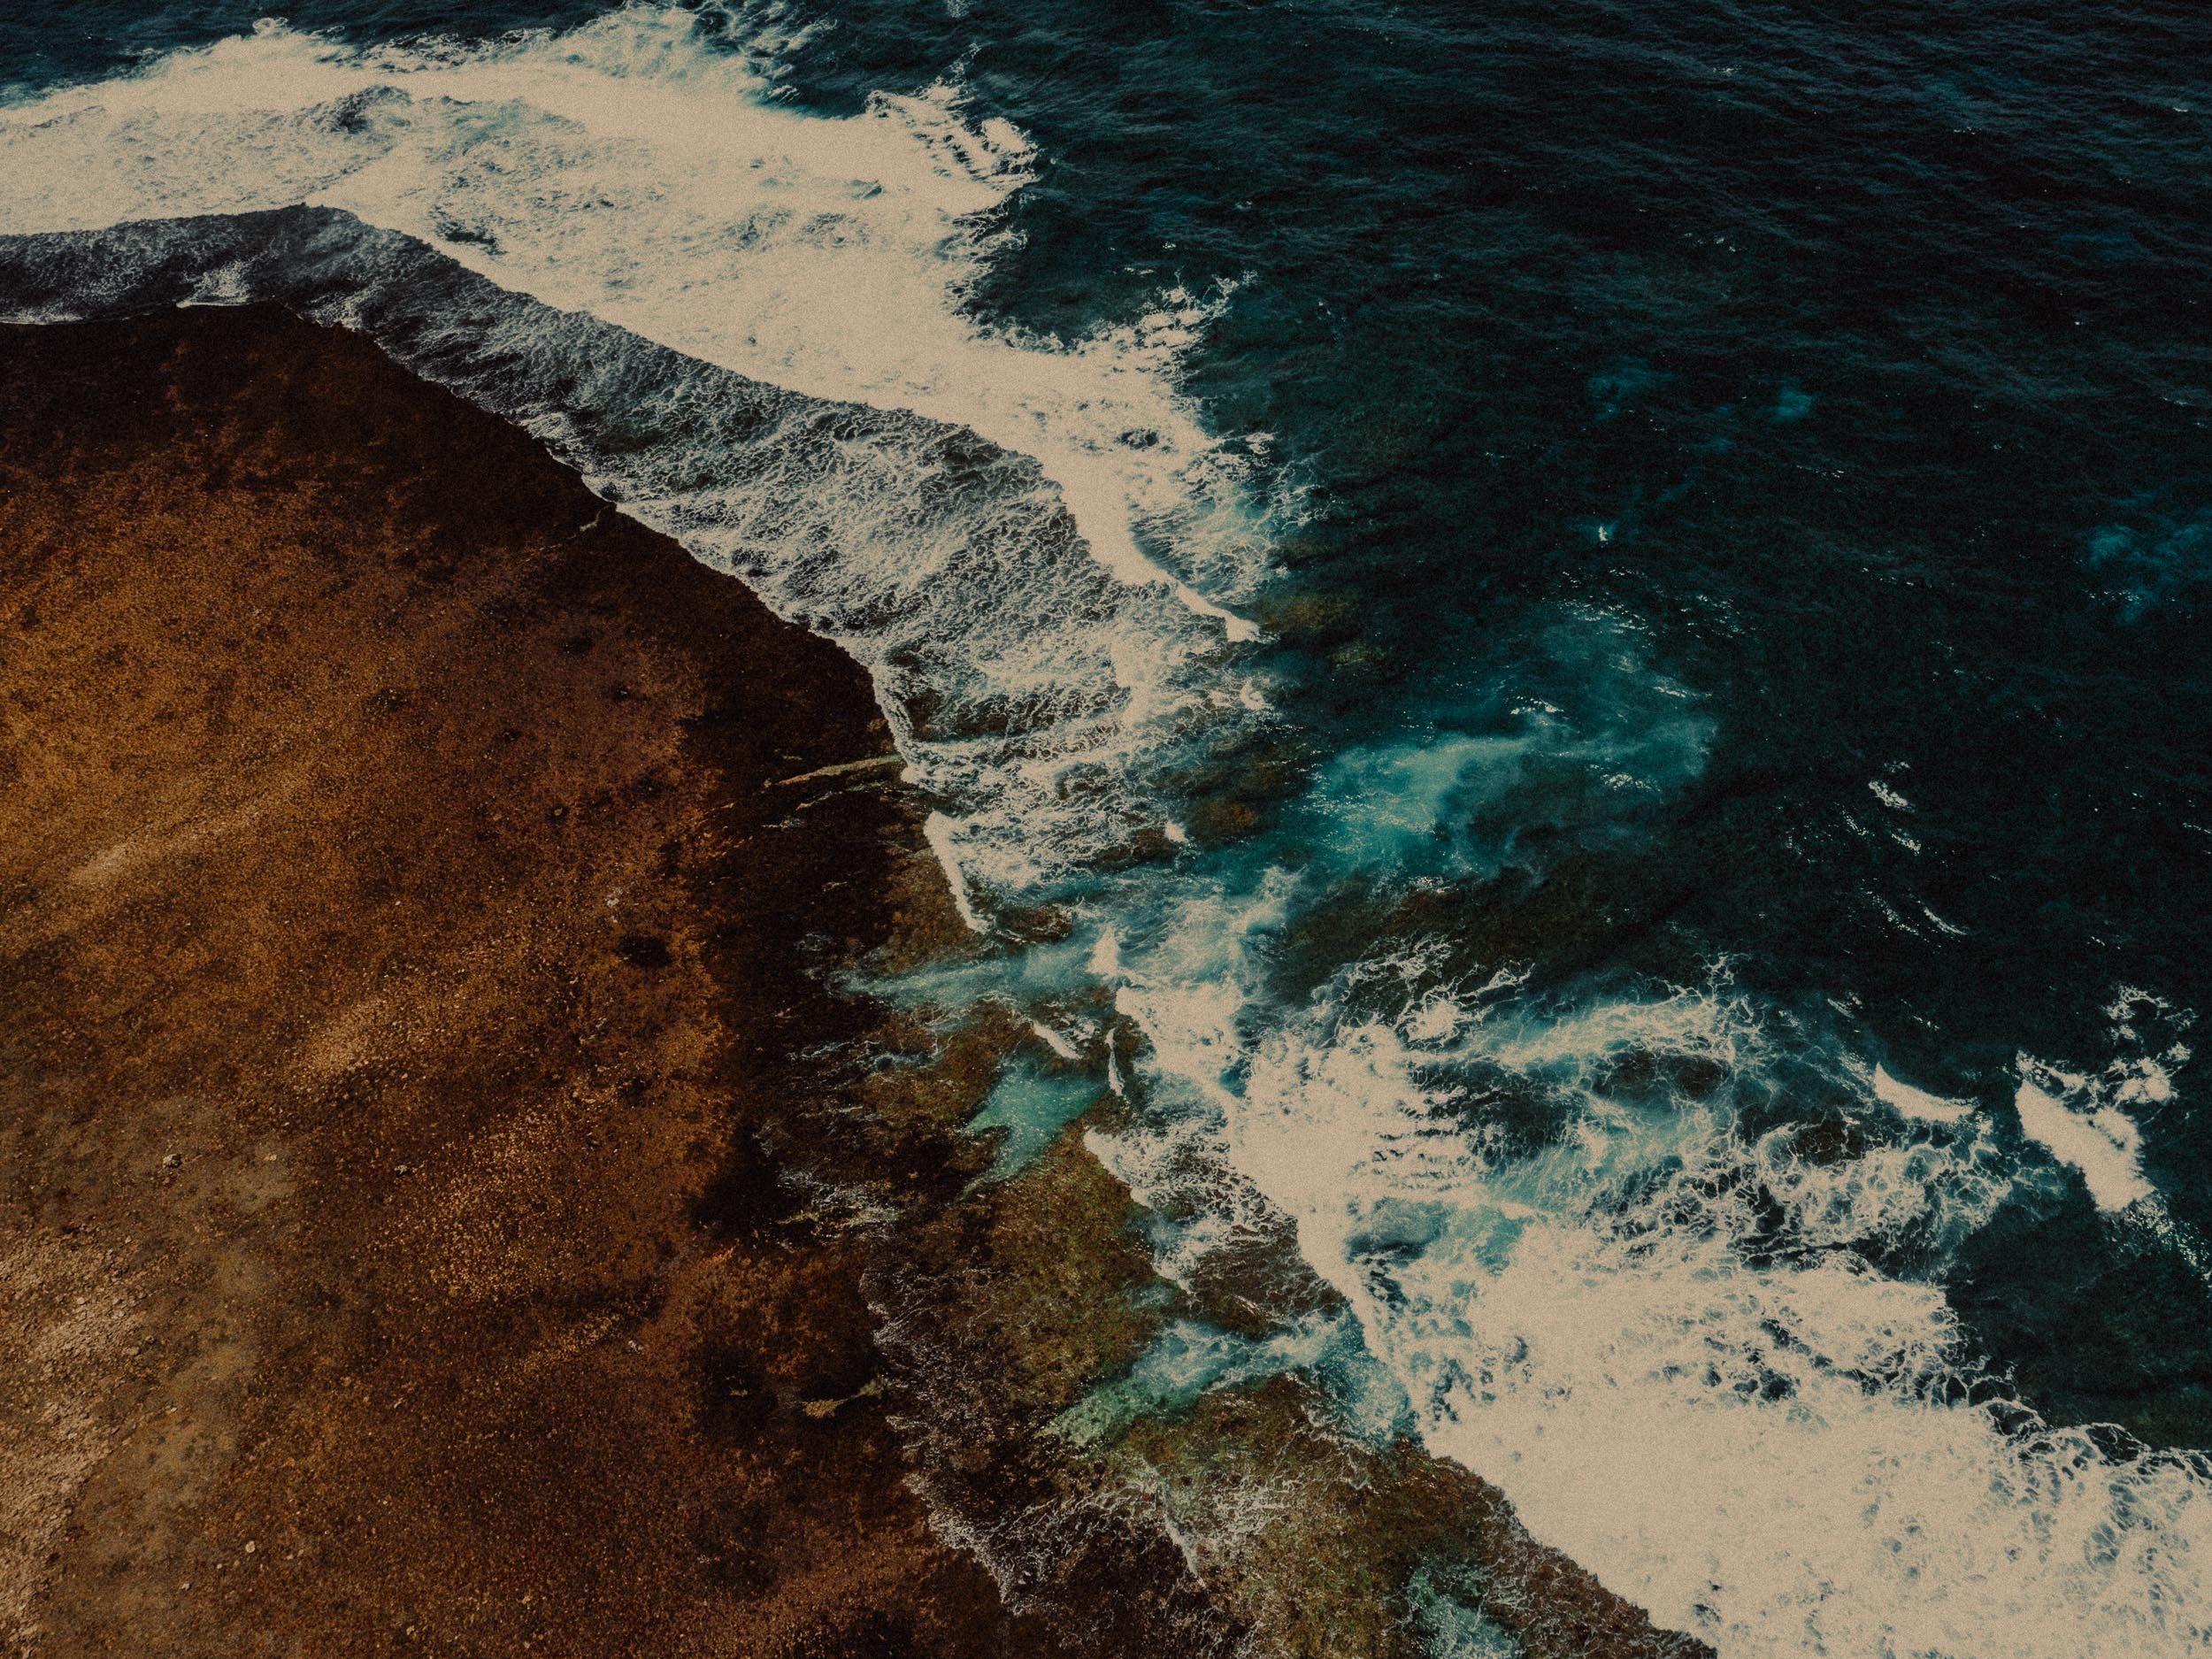 4-Siargao Drone Photography-Crashing waves and a trench, Philippine Sea, Siargao, Philippines, Southeast Asia, April 2022, Mavic 2 Pro, Hasselblad L1D-20c.jpg